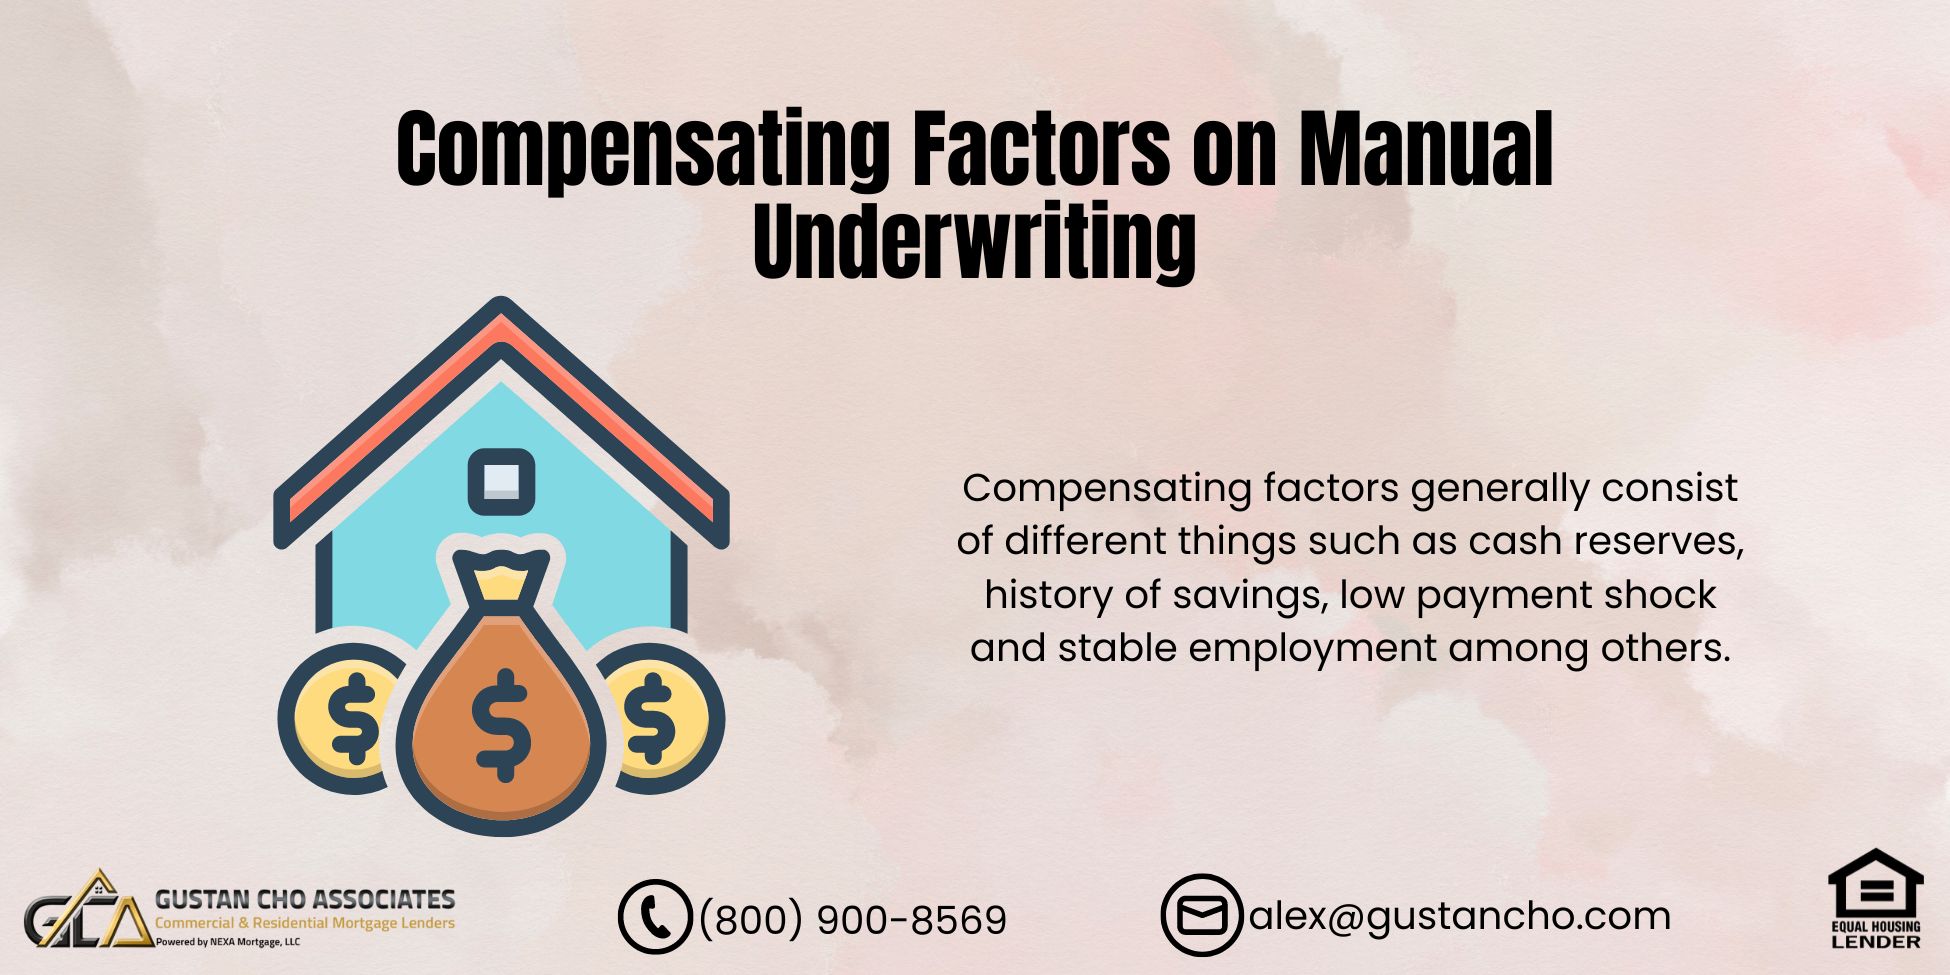 Compensating Factors on Manual Underwriting